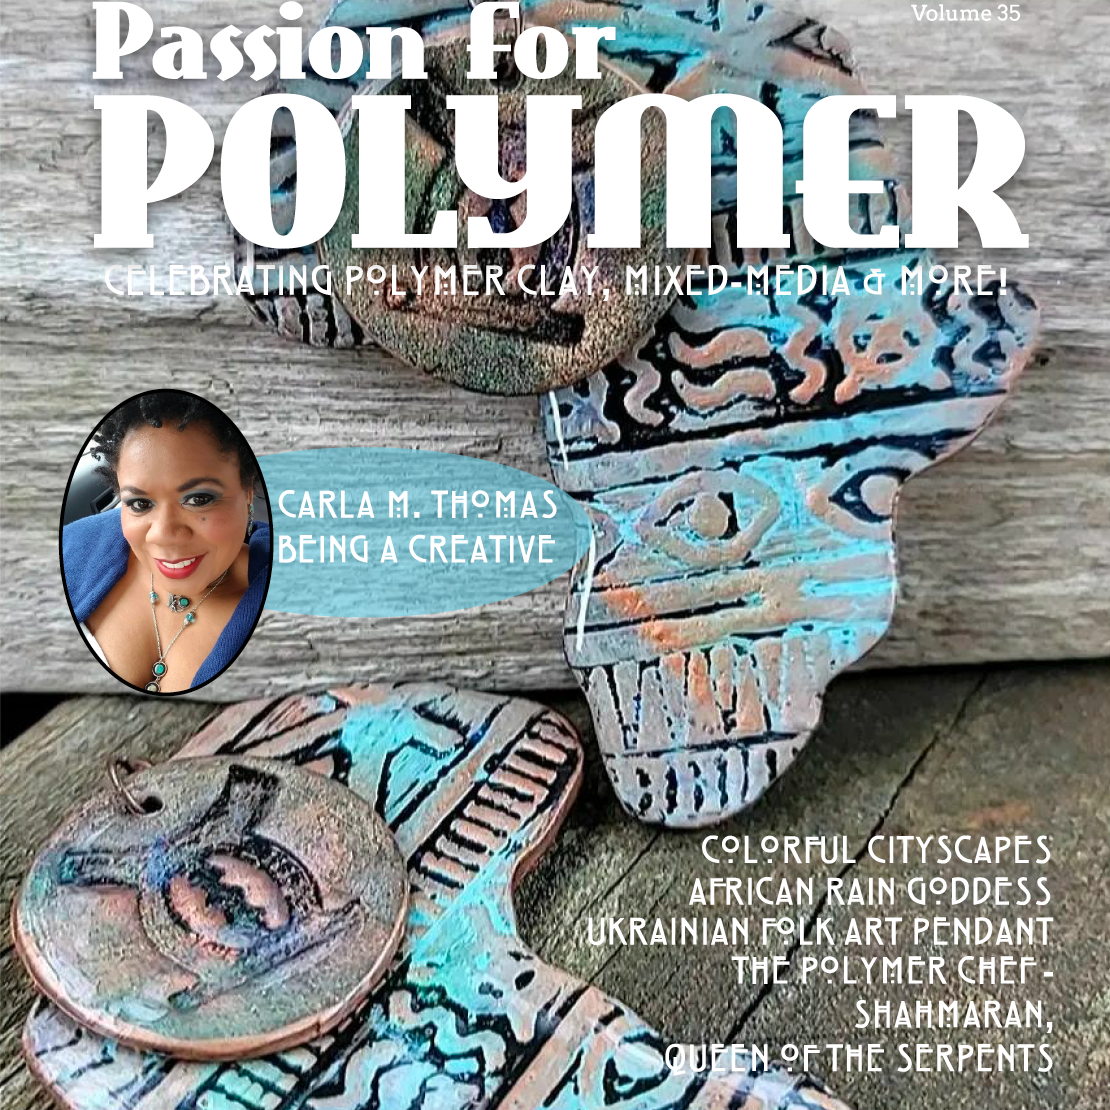 Around the World Inspired Tutorials Magazine: February 2022 Passion for Polymer Clay DIGITAL Downloadable PDF